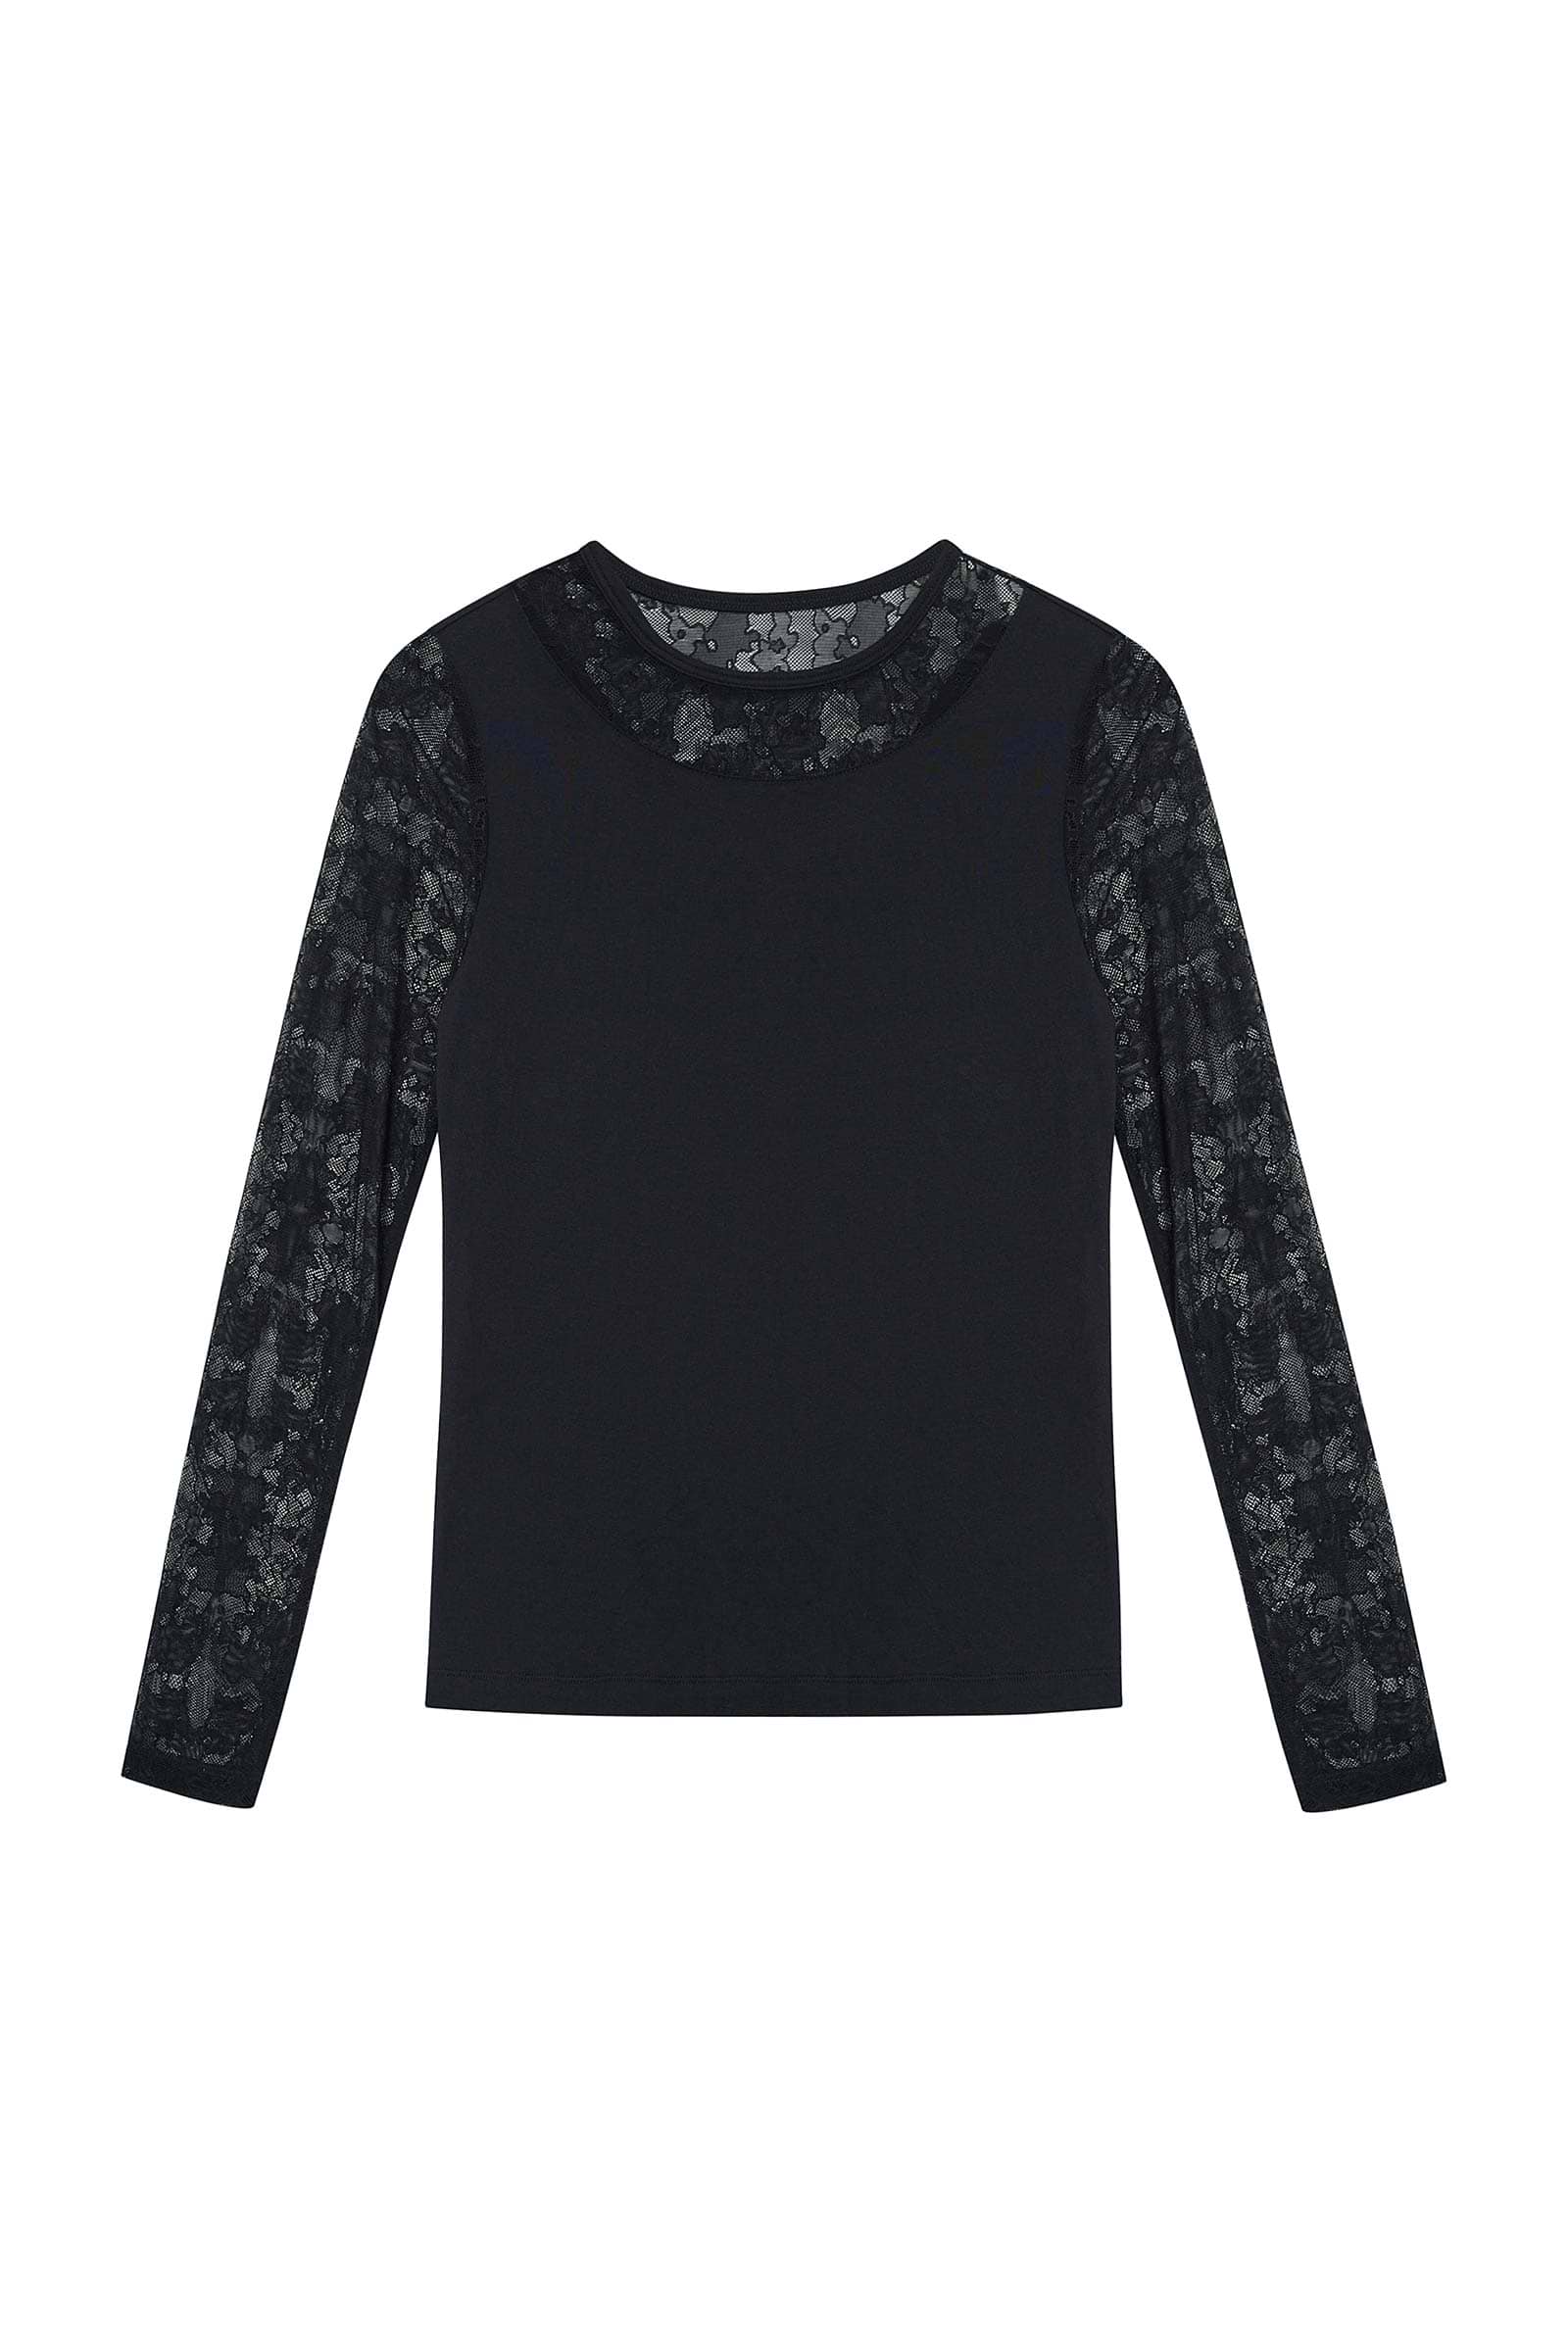 The Best Travel Top. Flat Lay of a Kim Camo Mesh Top in Black.